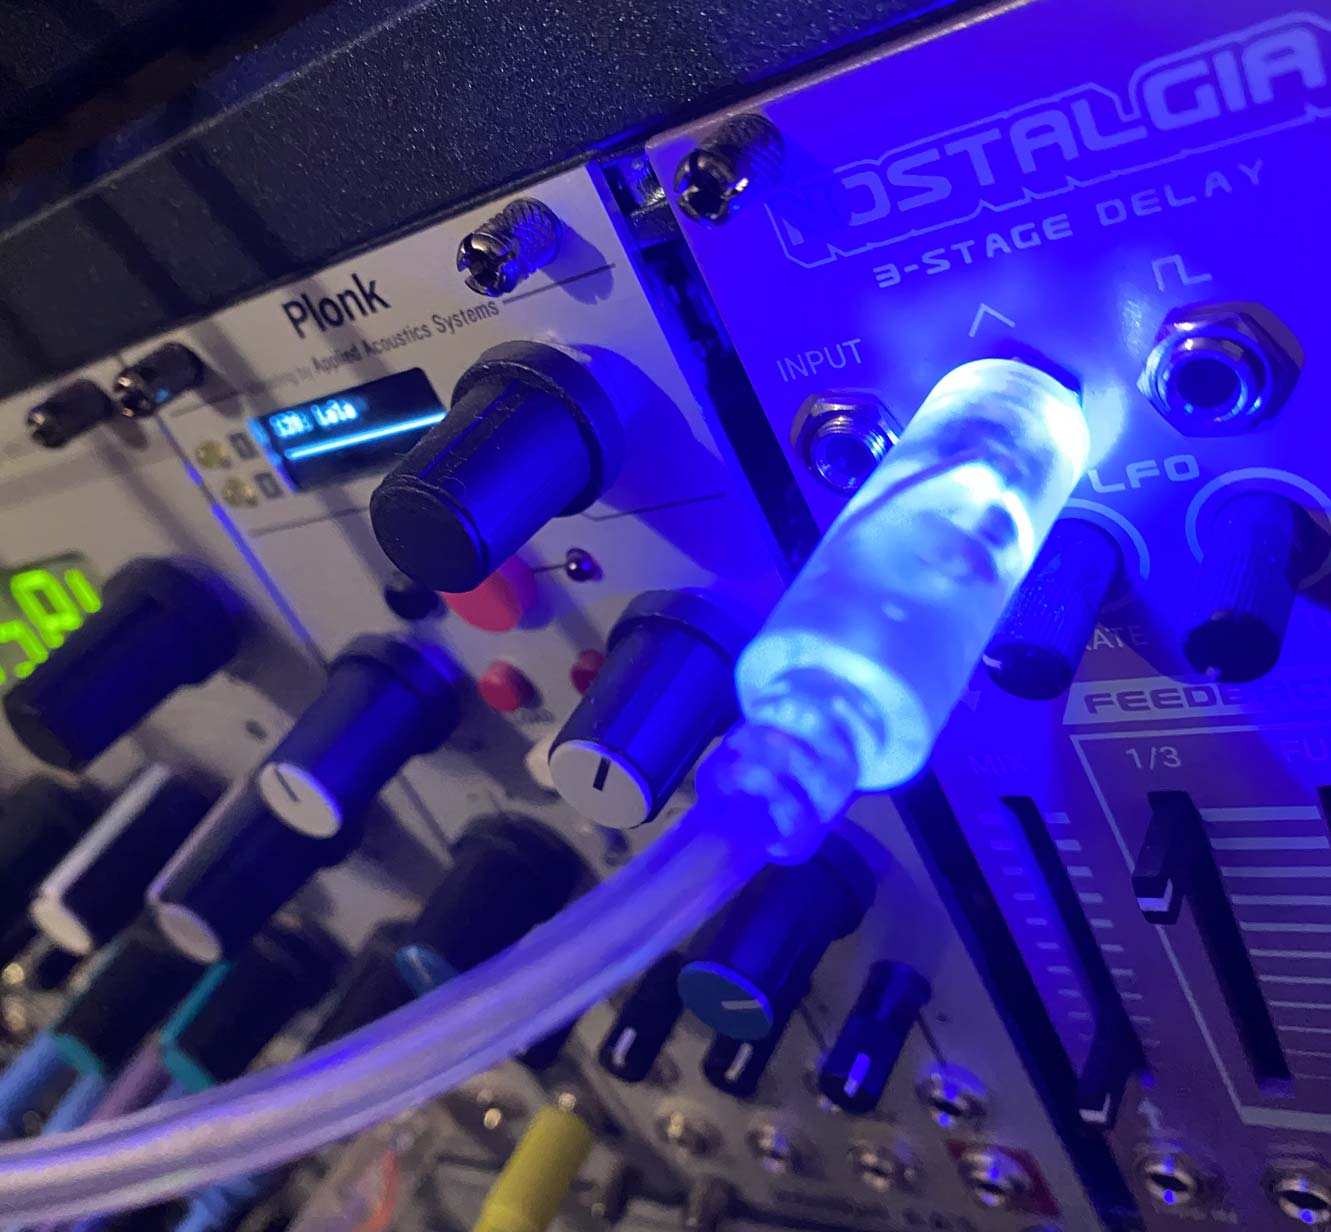 Patchcables with built in Bi-color LED for Eurorack - Producer Tools